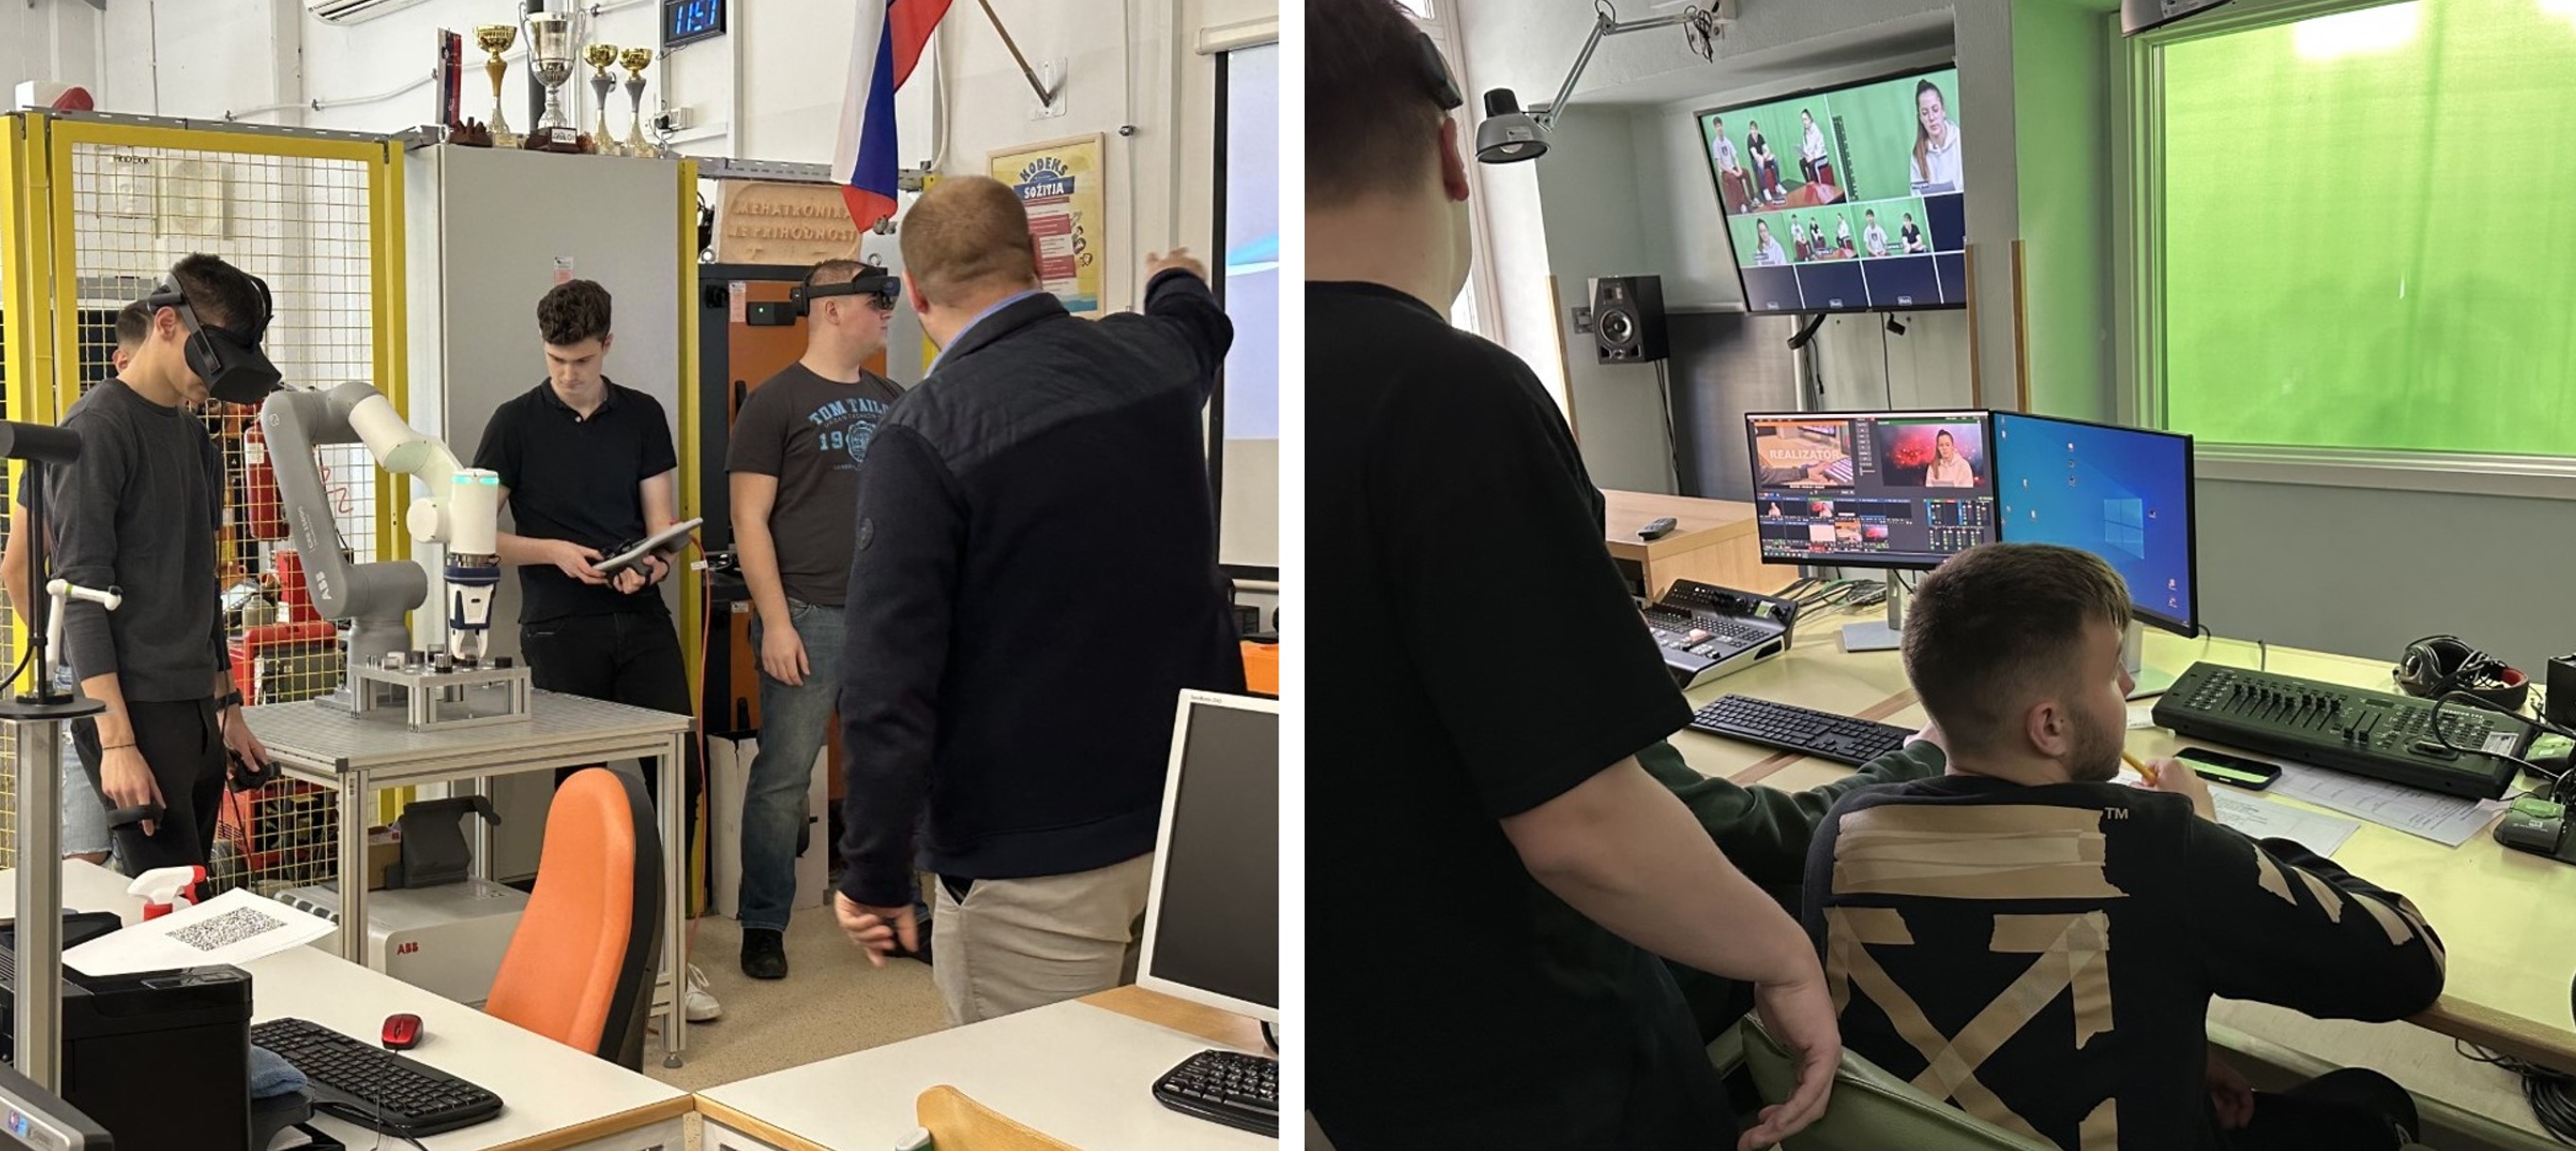 The picture on the left shows several people in a classroom, two wearing virtual reality goggles and one operating a robot. On the right is a room with a screen on the wall and two screens on a table, with a person sitting at the table and one person standing behind that person.